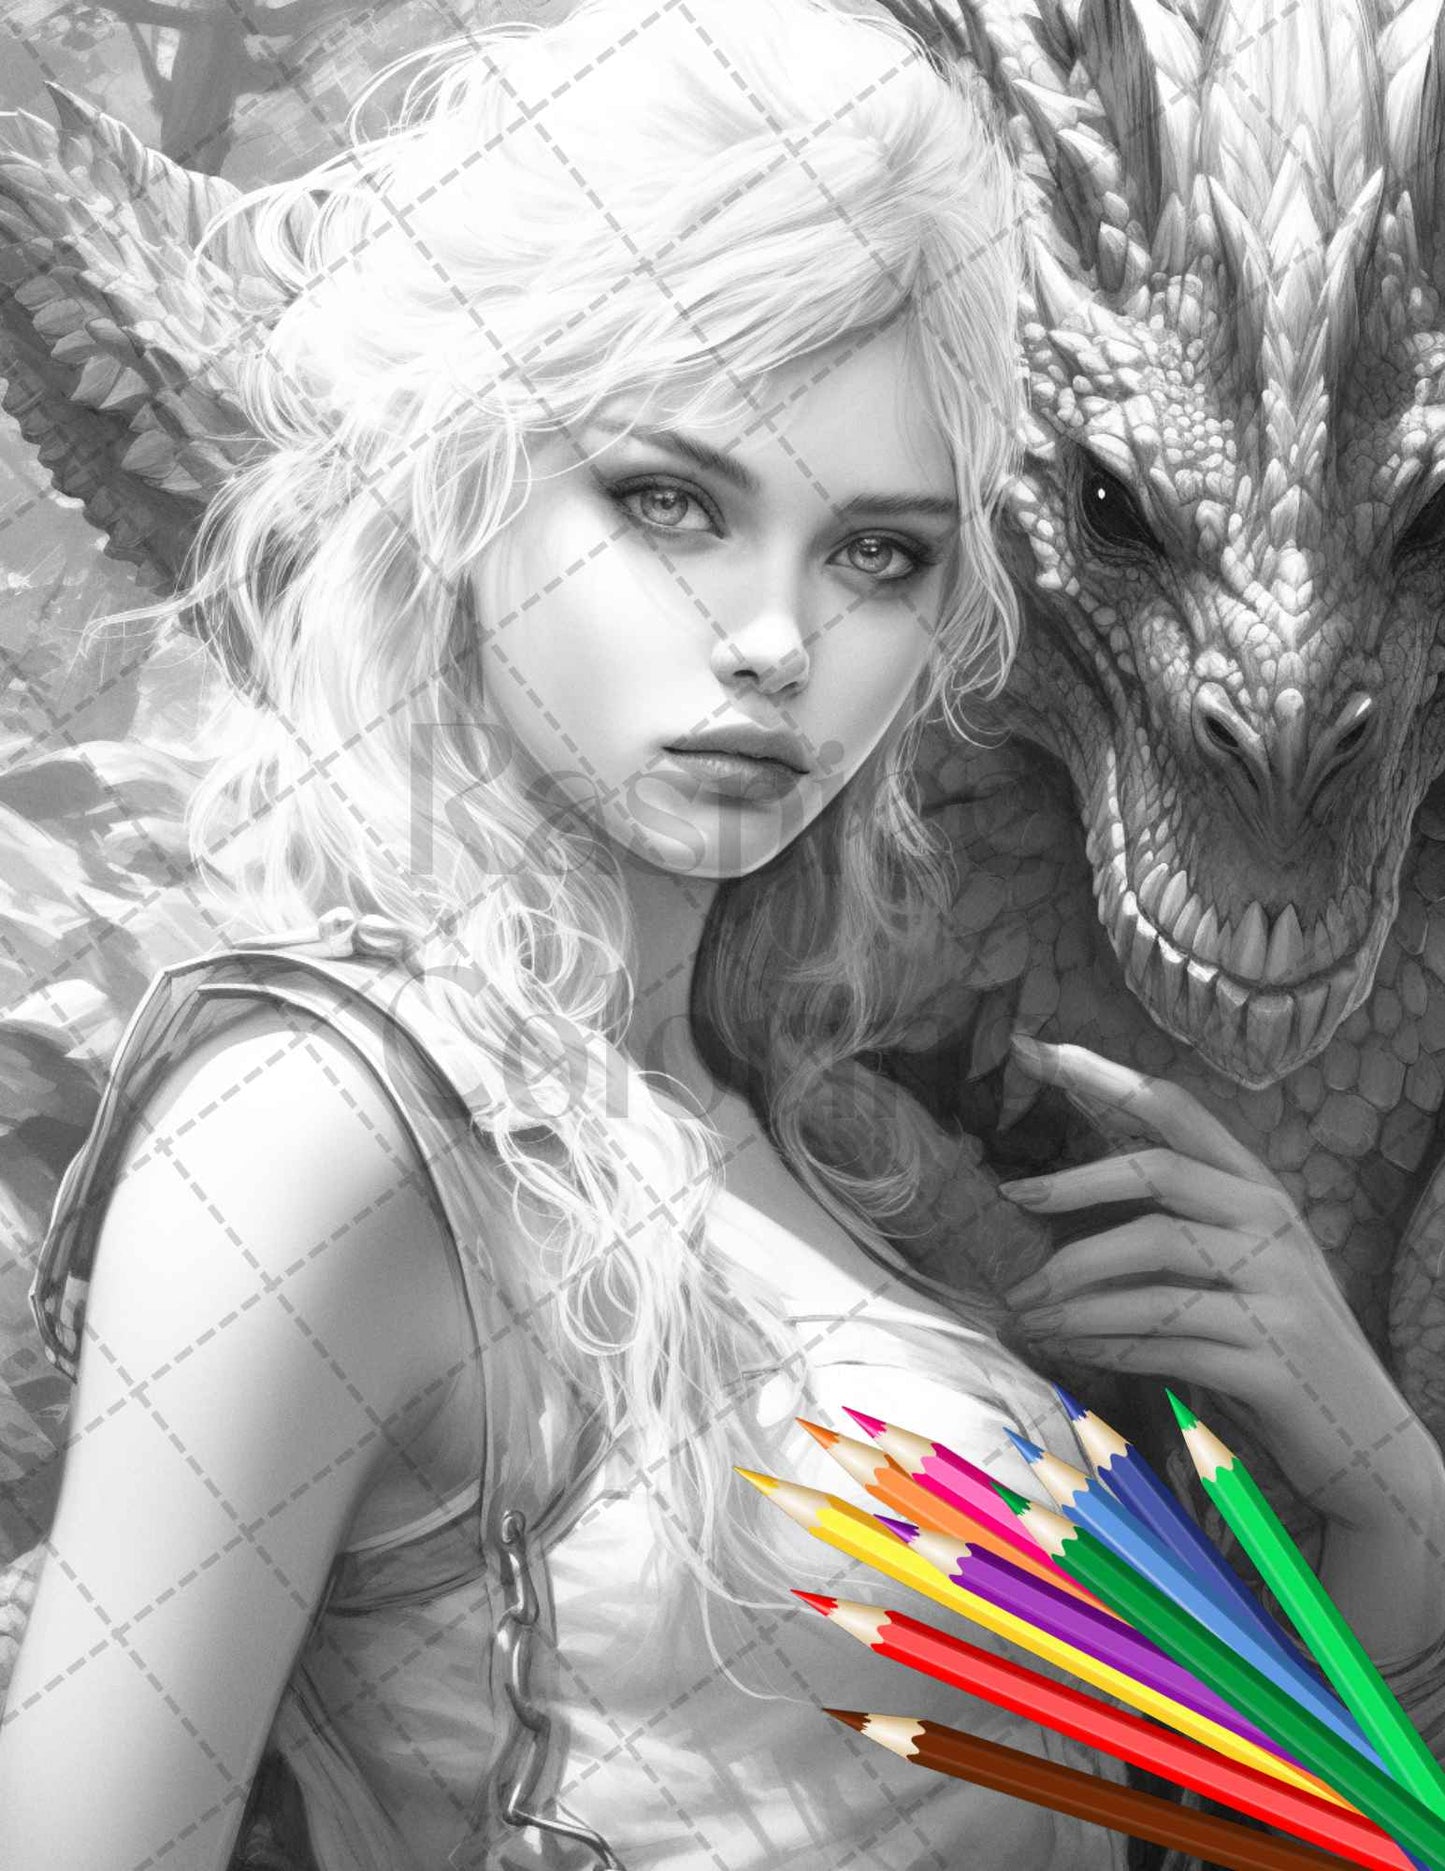 grayscale coloring pages, printable dragons, enchanted dragon queens, adult coloring book, fantasy art, detailed coloring illustrations, grayscale art, mythical creatures, magical queens, dragon illustrations, coloring for adults